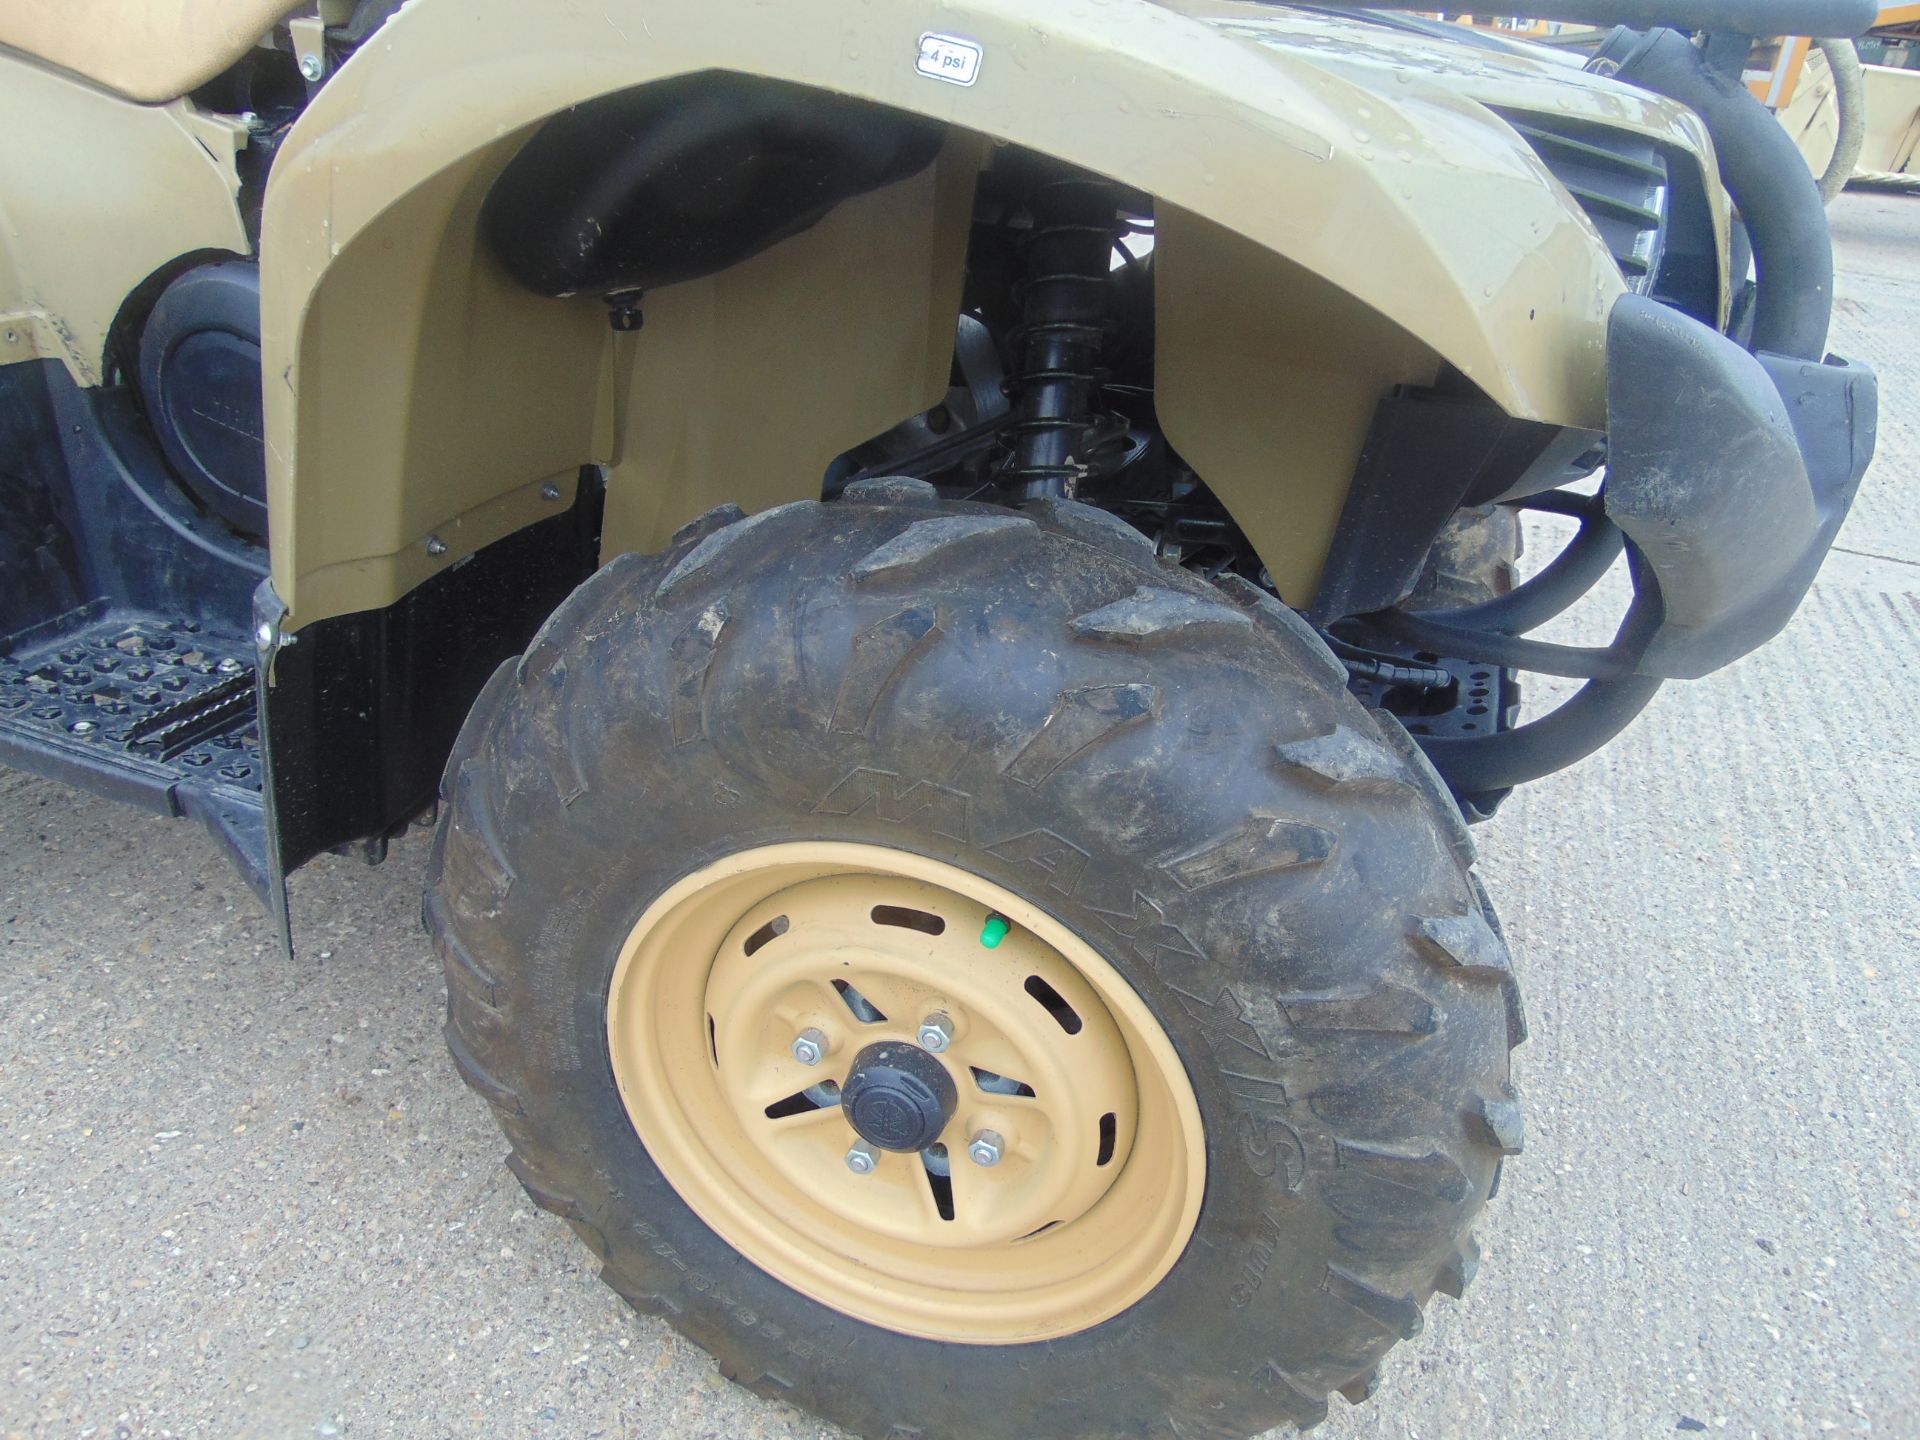 Military Specification Yamaha Grizzly 450 4 x 4 ATV Quad Bike - Image 16 of 19